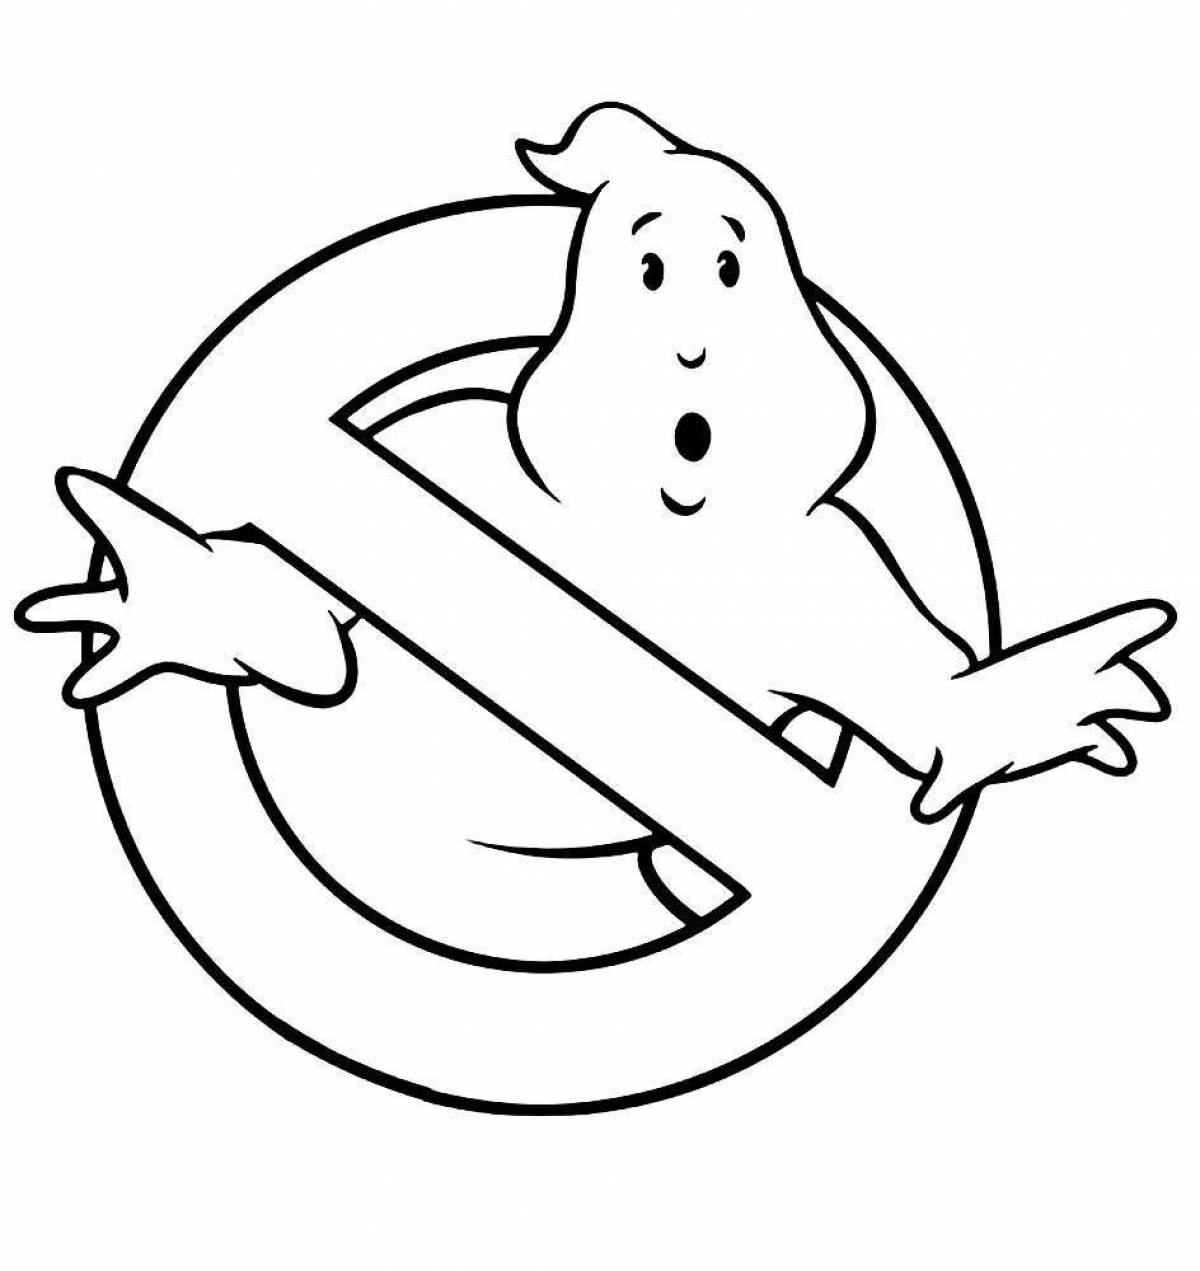 Ghostbusters creepy coloring page